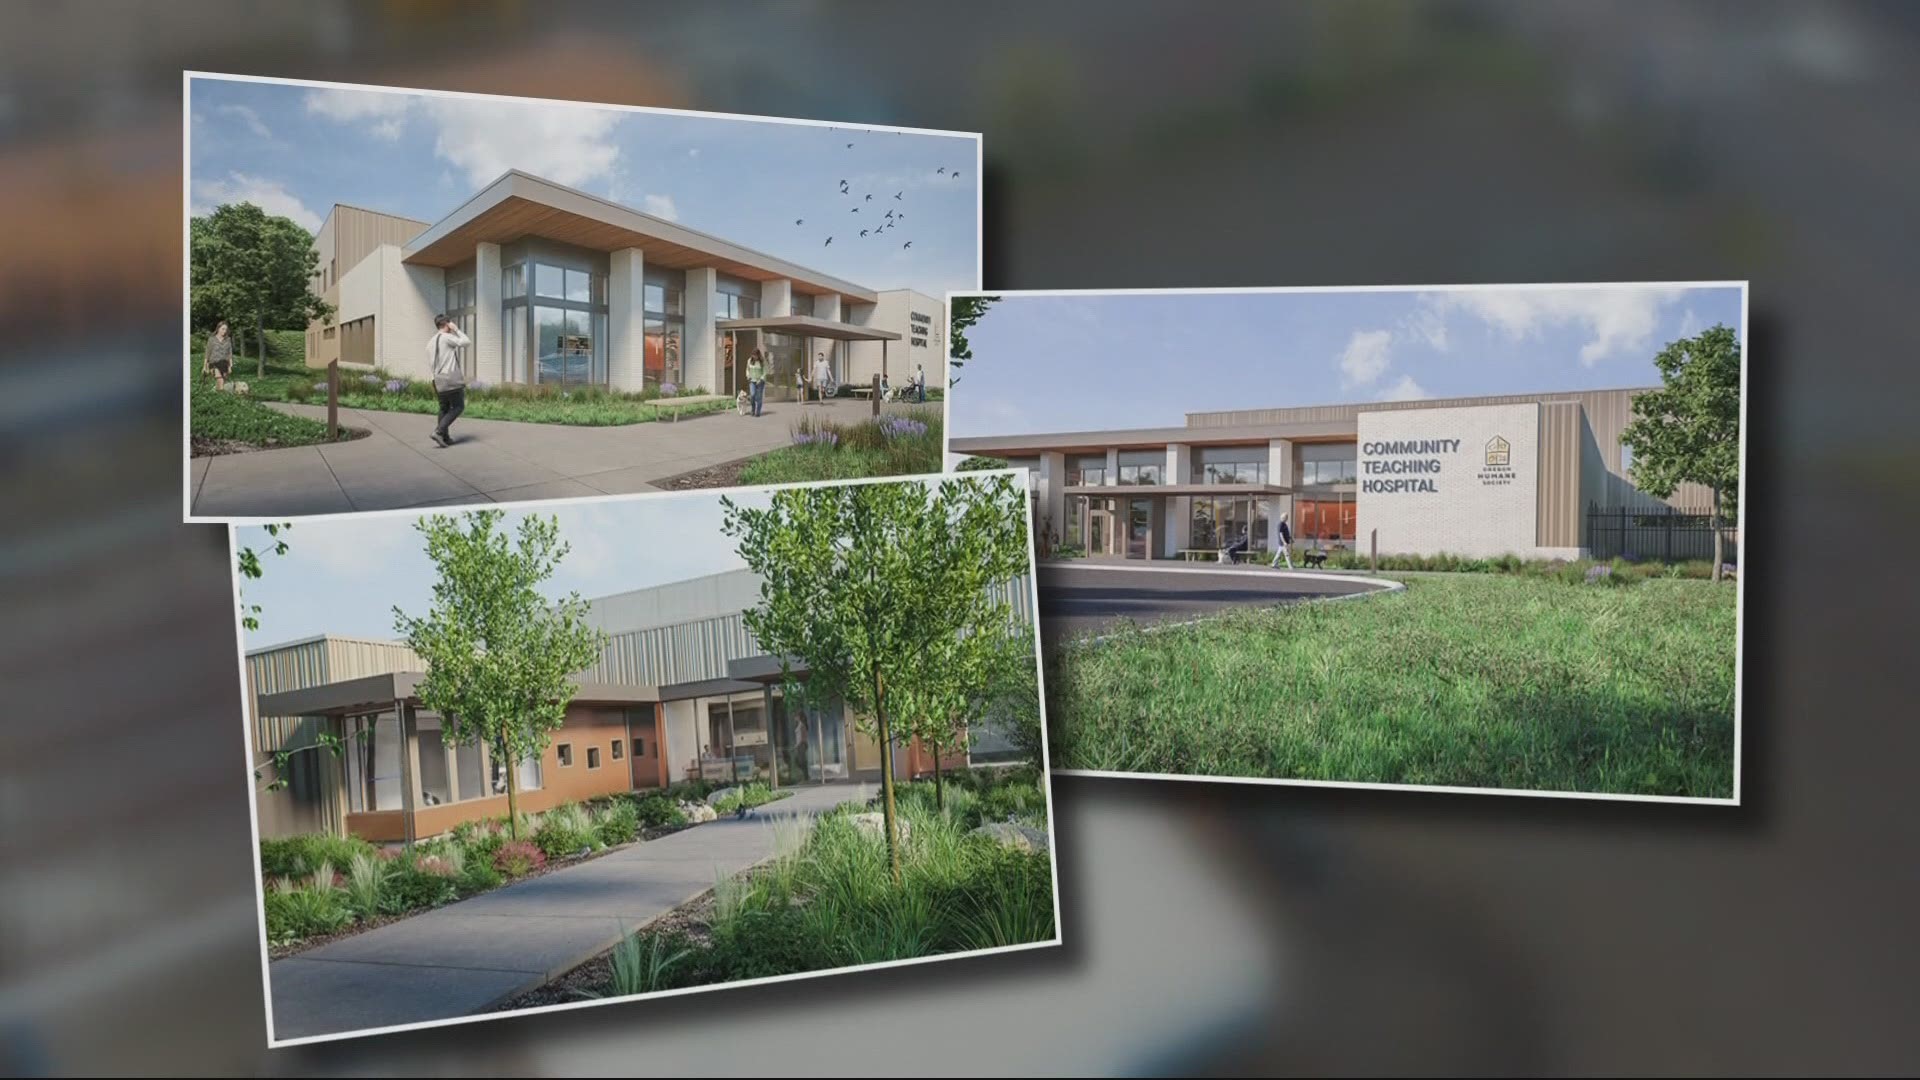 The Oregon Humane Society has begun work on its most ambitious expansion yet, so staff can help even more animals.